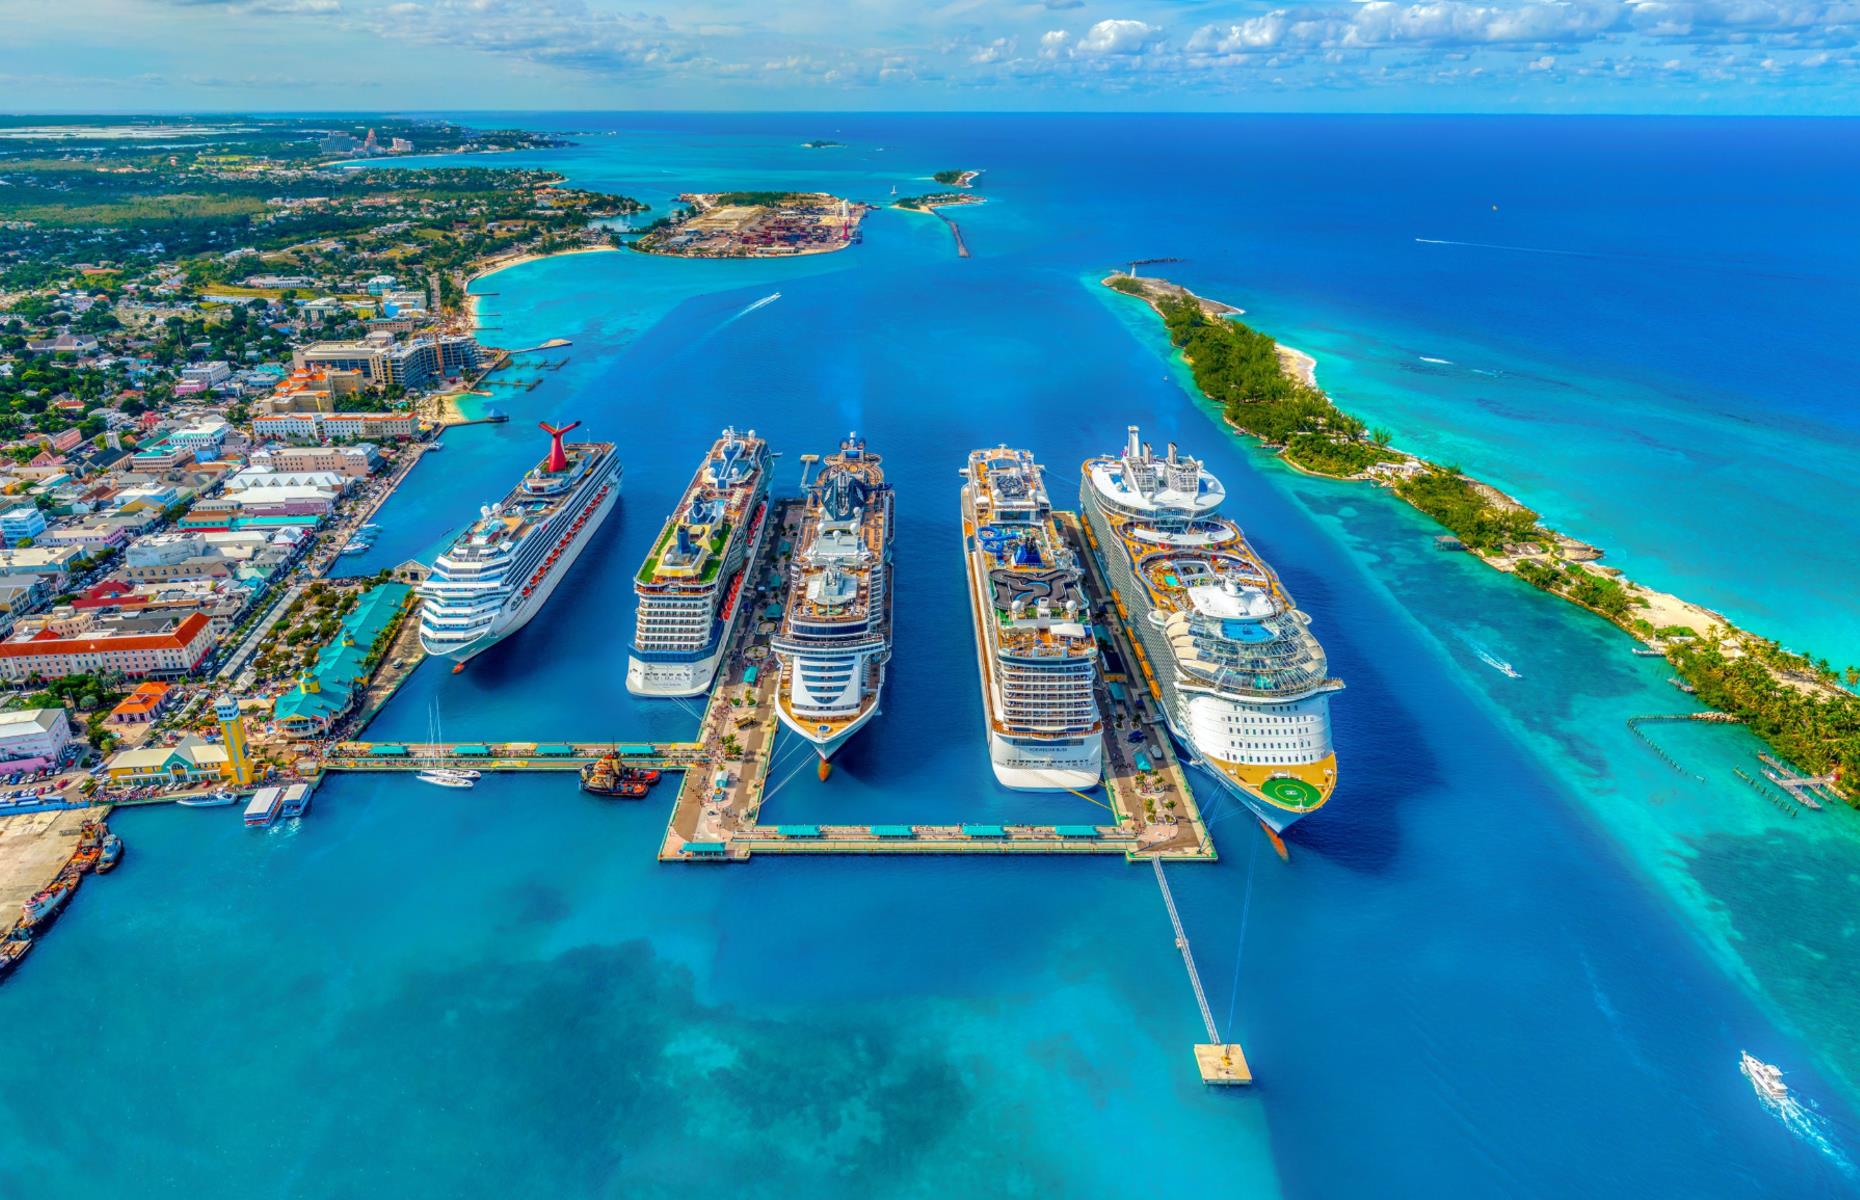 <p>The glimmering ocean and white sandy beaches make for the perfect backdrop to the main seaport in the Bahamas. Nassau, located on New Providence Island, is the capital city of the Bahamas and an ideal starting point for those wishing to explore the archipelago.</p>  <p><strong><a href="https://www.loveexploring.com/galleries/86628/jawdropping-photos-of-america-from-above">Now discover amazing images of America from above</a></strong></p>